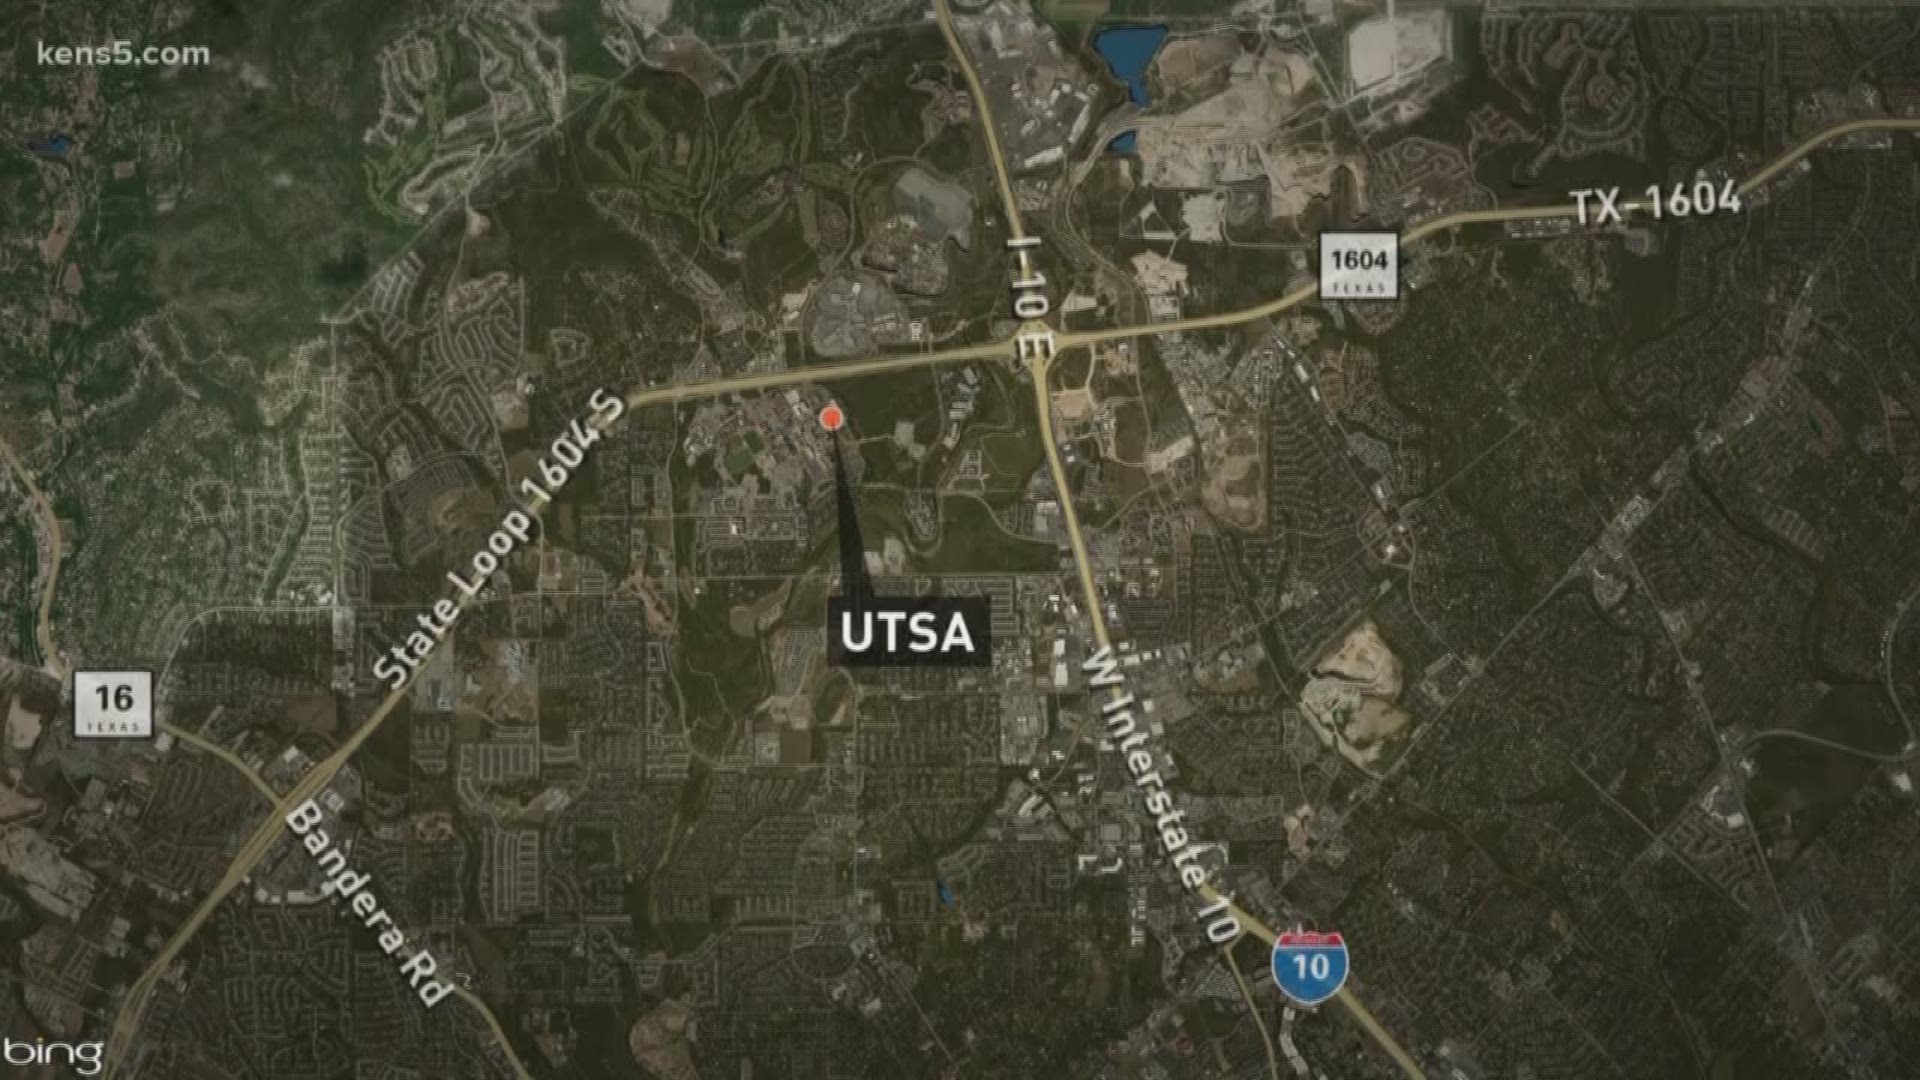 A round of burglaries near the UTSA campus is prompting a warning for students tonight.